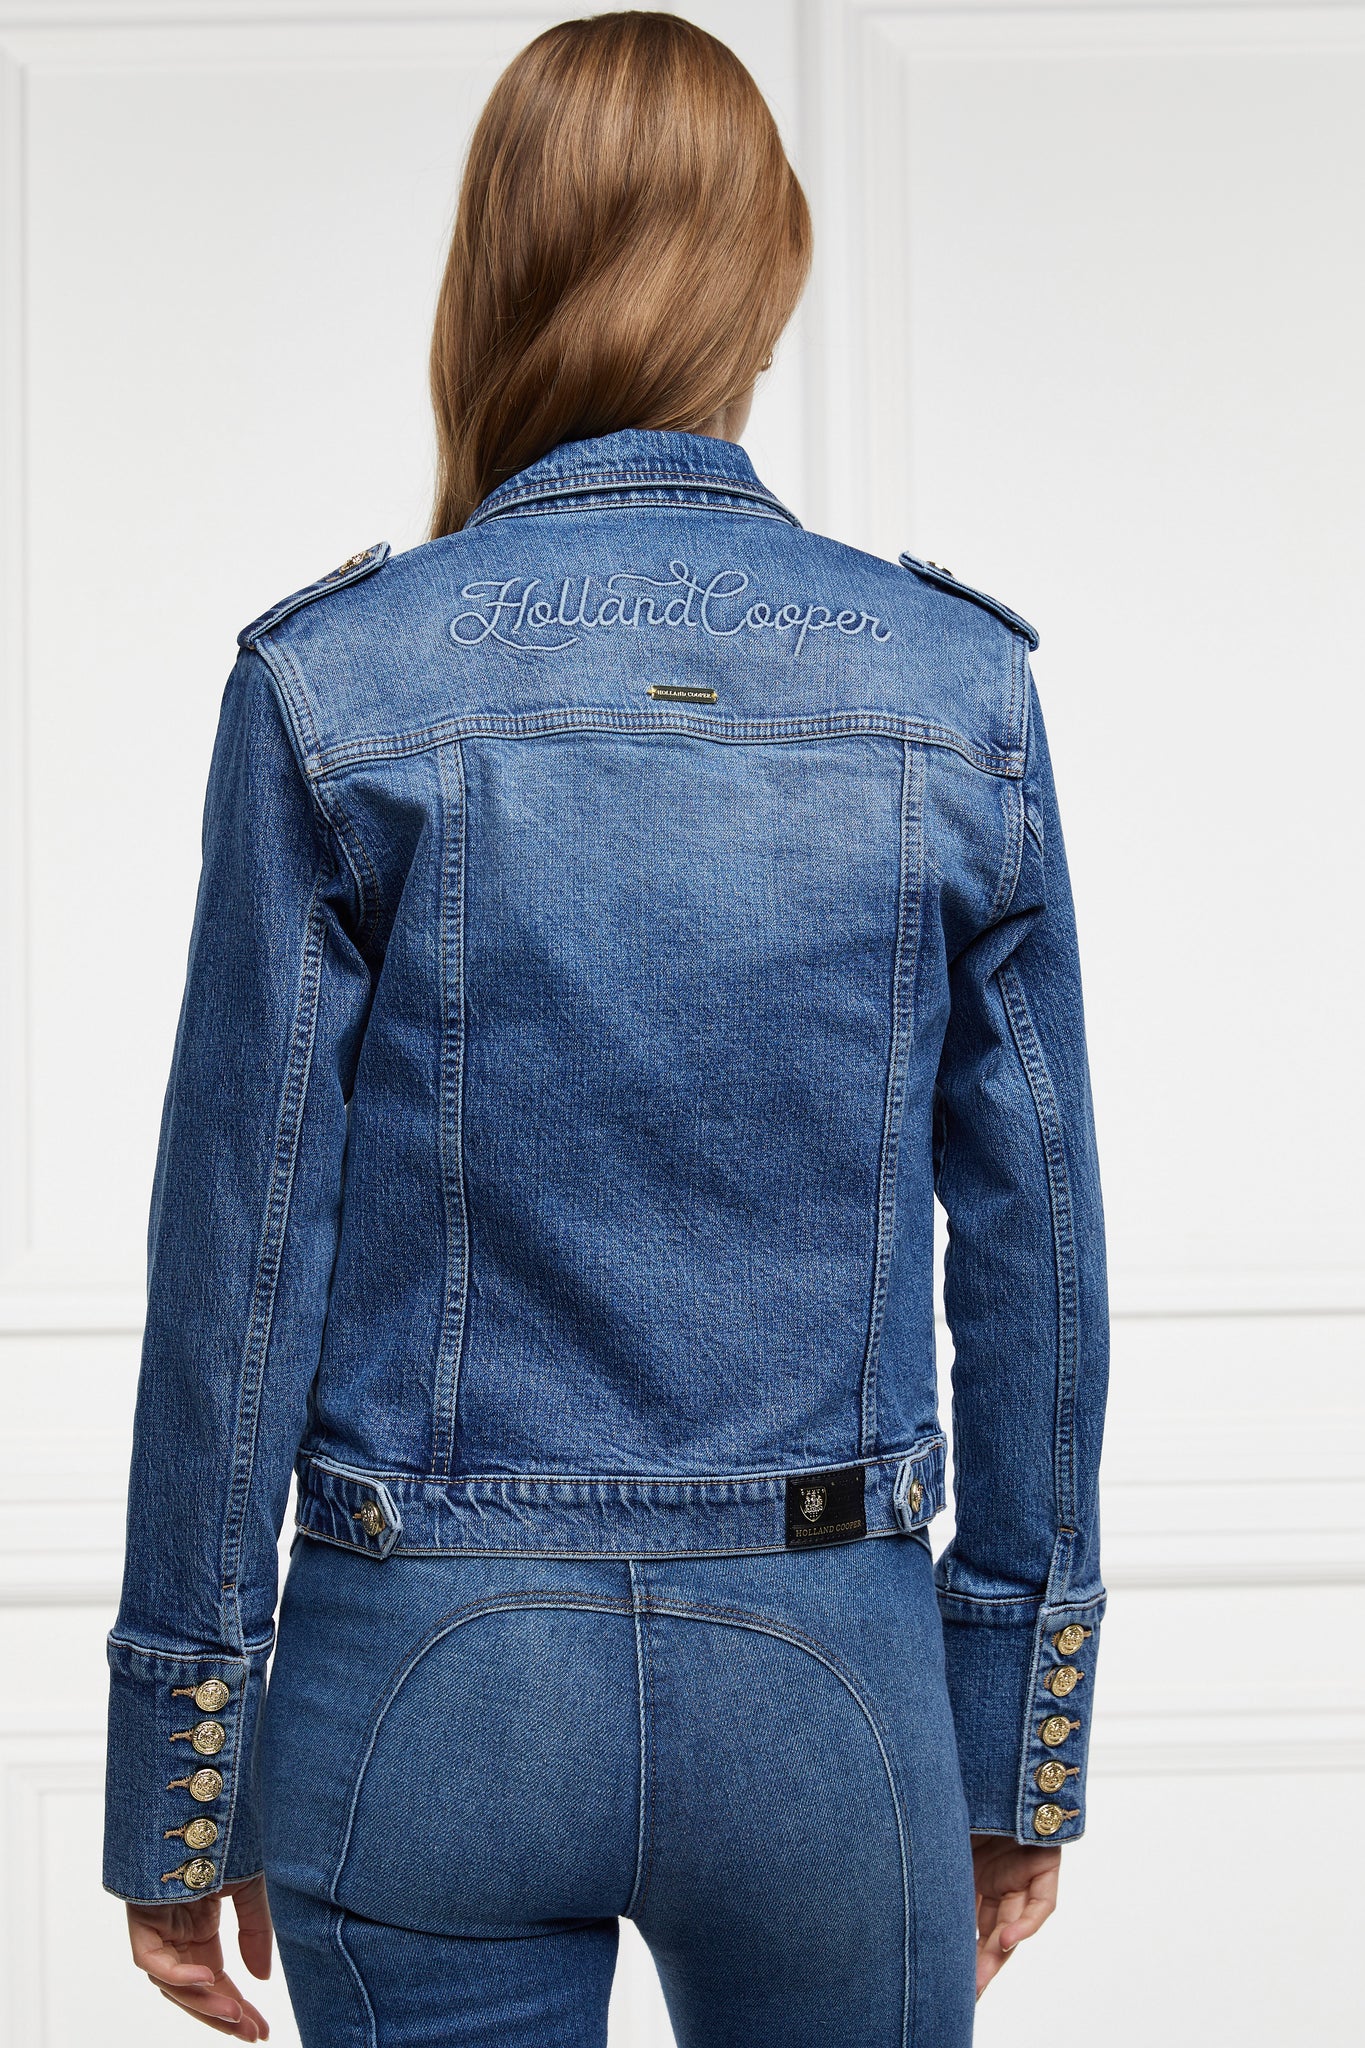 back of classic indigo denim jacket waist length with gold buttons on front, pockets and cuffs with holland cooper embroidery on back